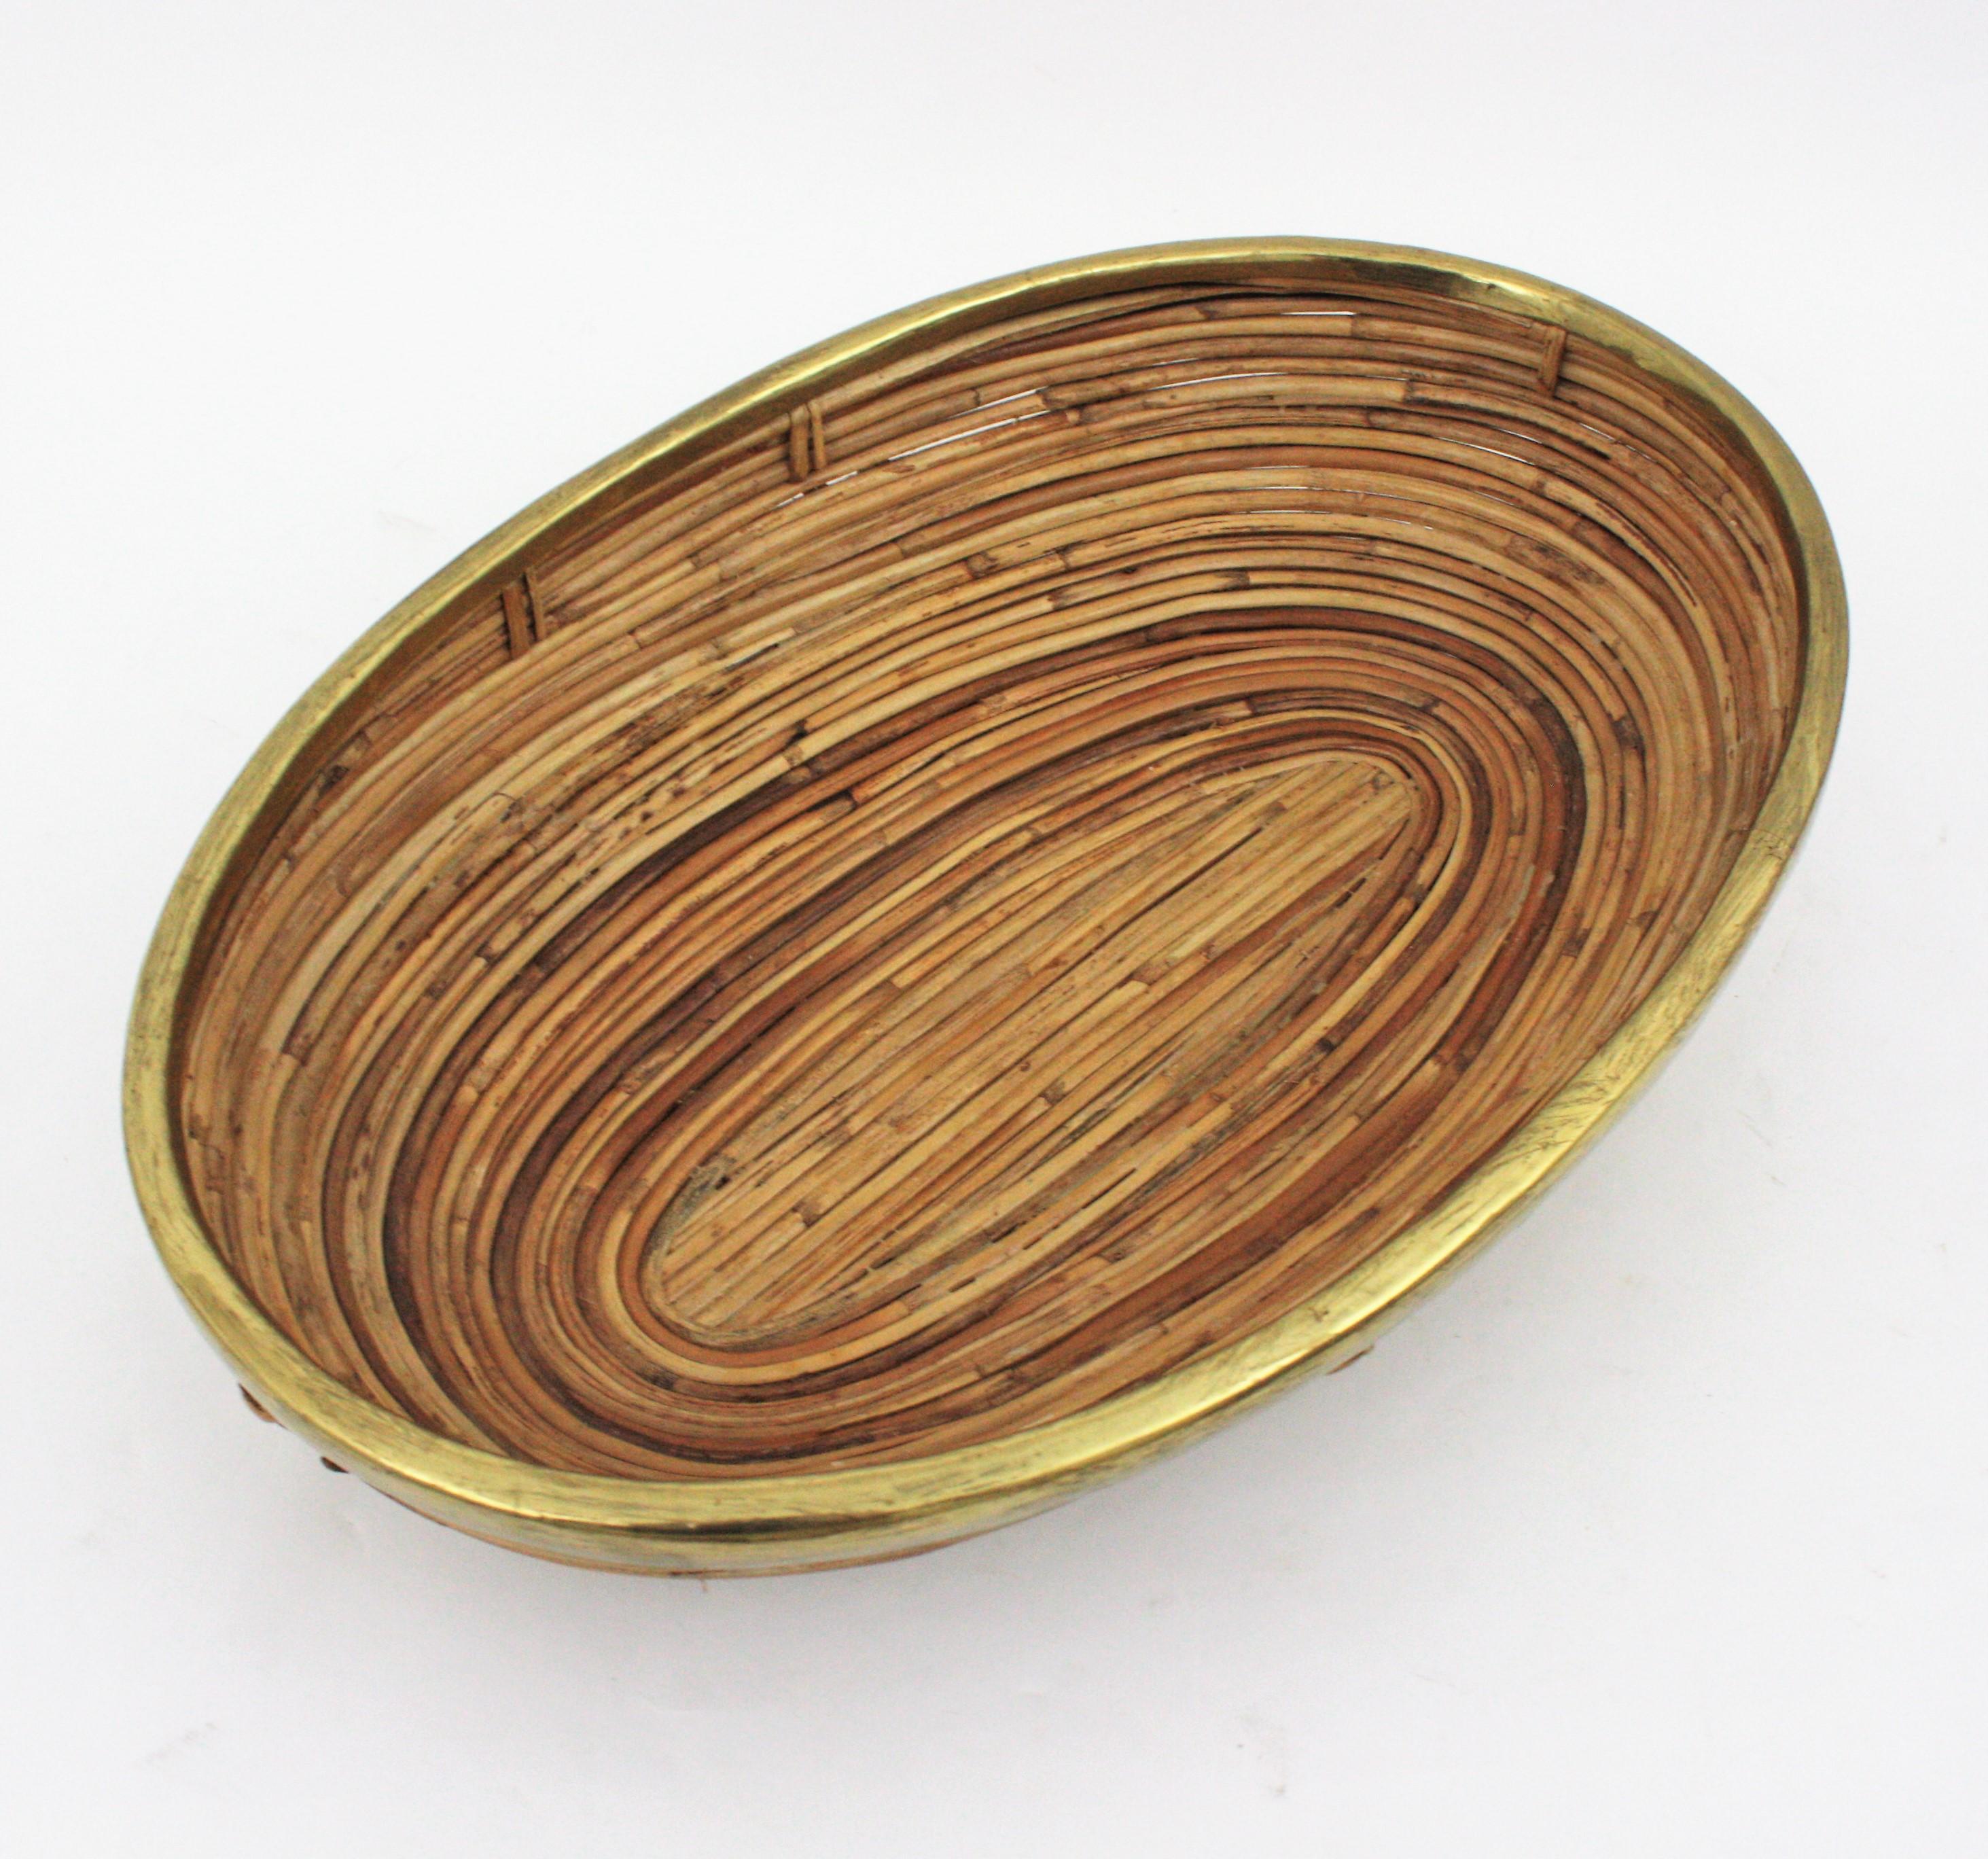 Rattan and Brass Italian Large Oval Basket Centerpiece Bowl, 1970s For Sale 4